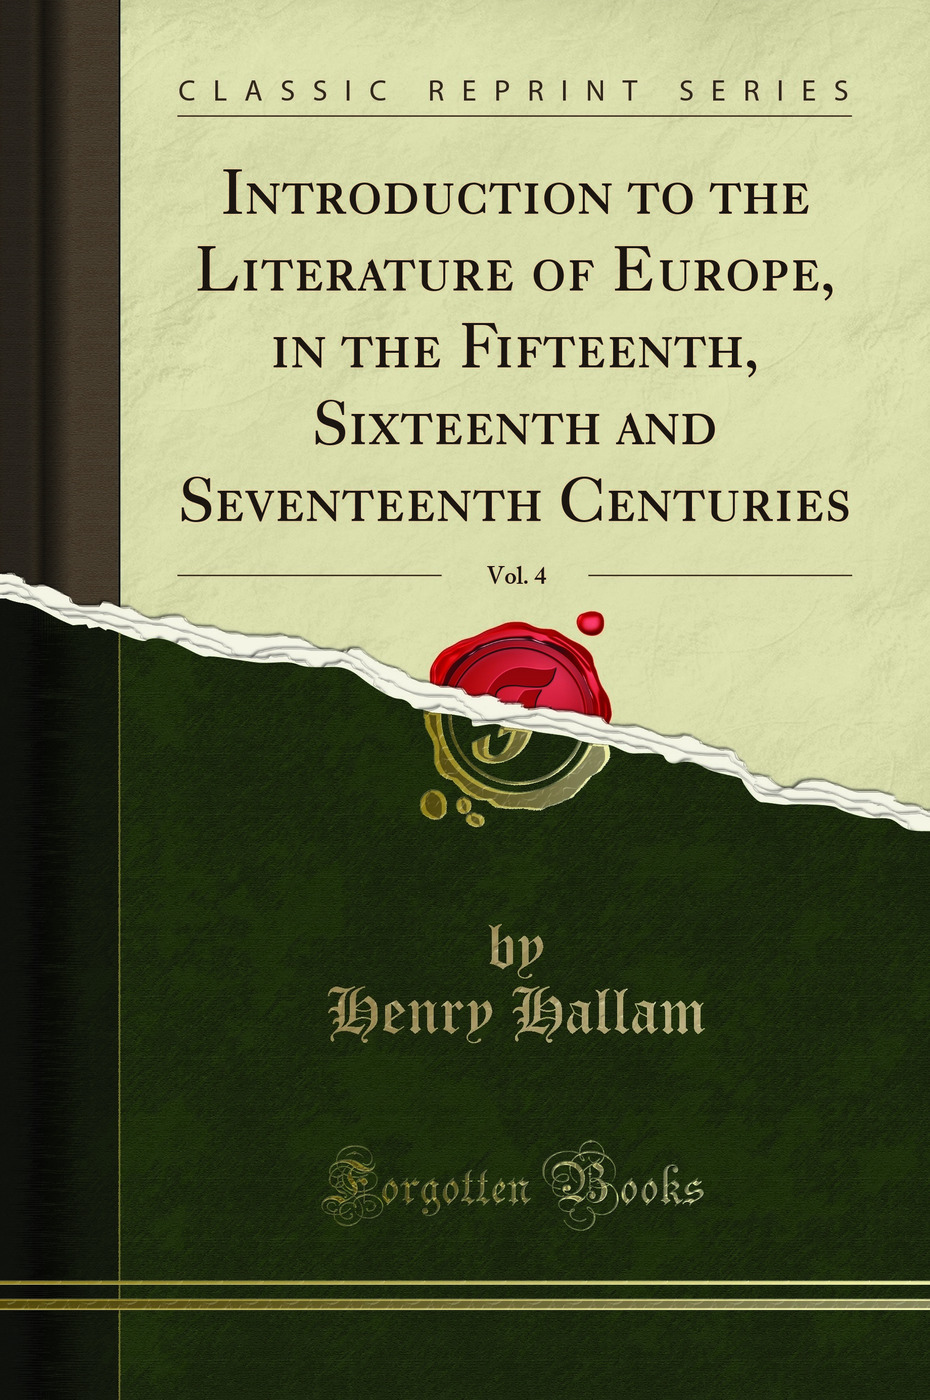 Introduction to the Literature of Europe, in the Fifteenth, Sixteenth and - Henry Hallam